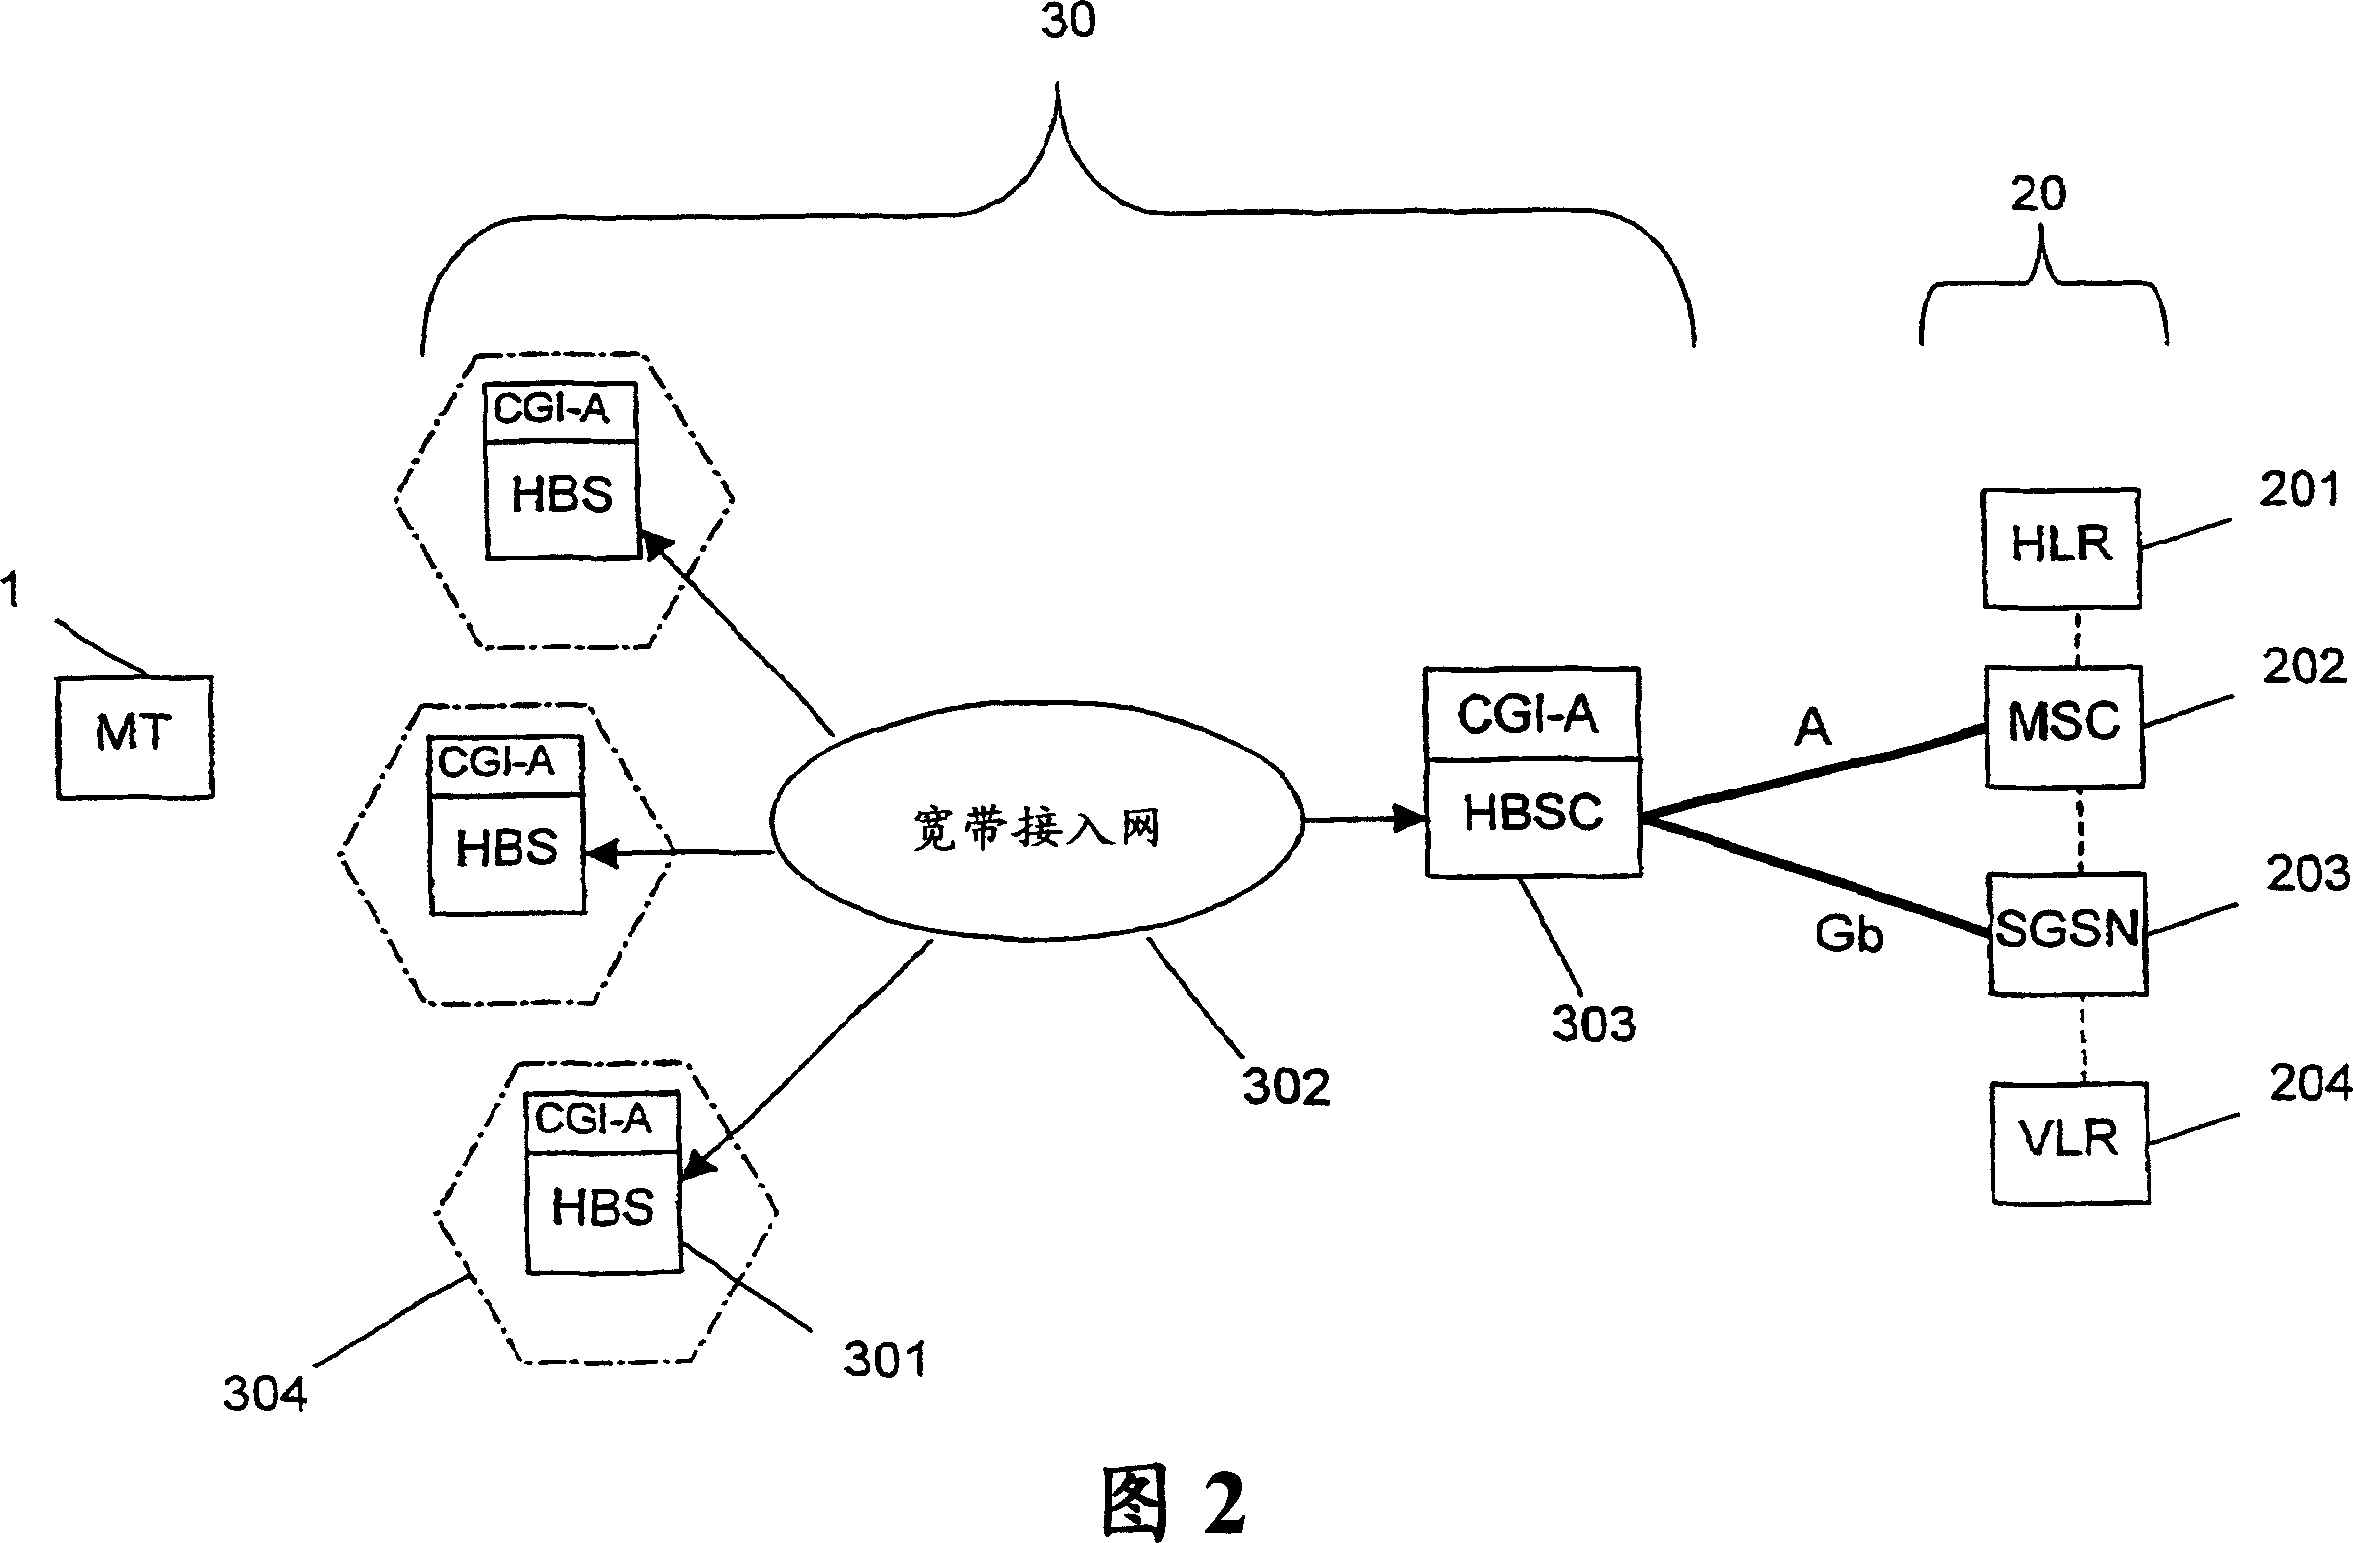 Handover between a cellular network and an unlicensed radio access network using a single identifier for all the access points